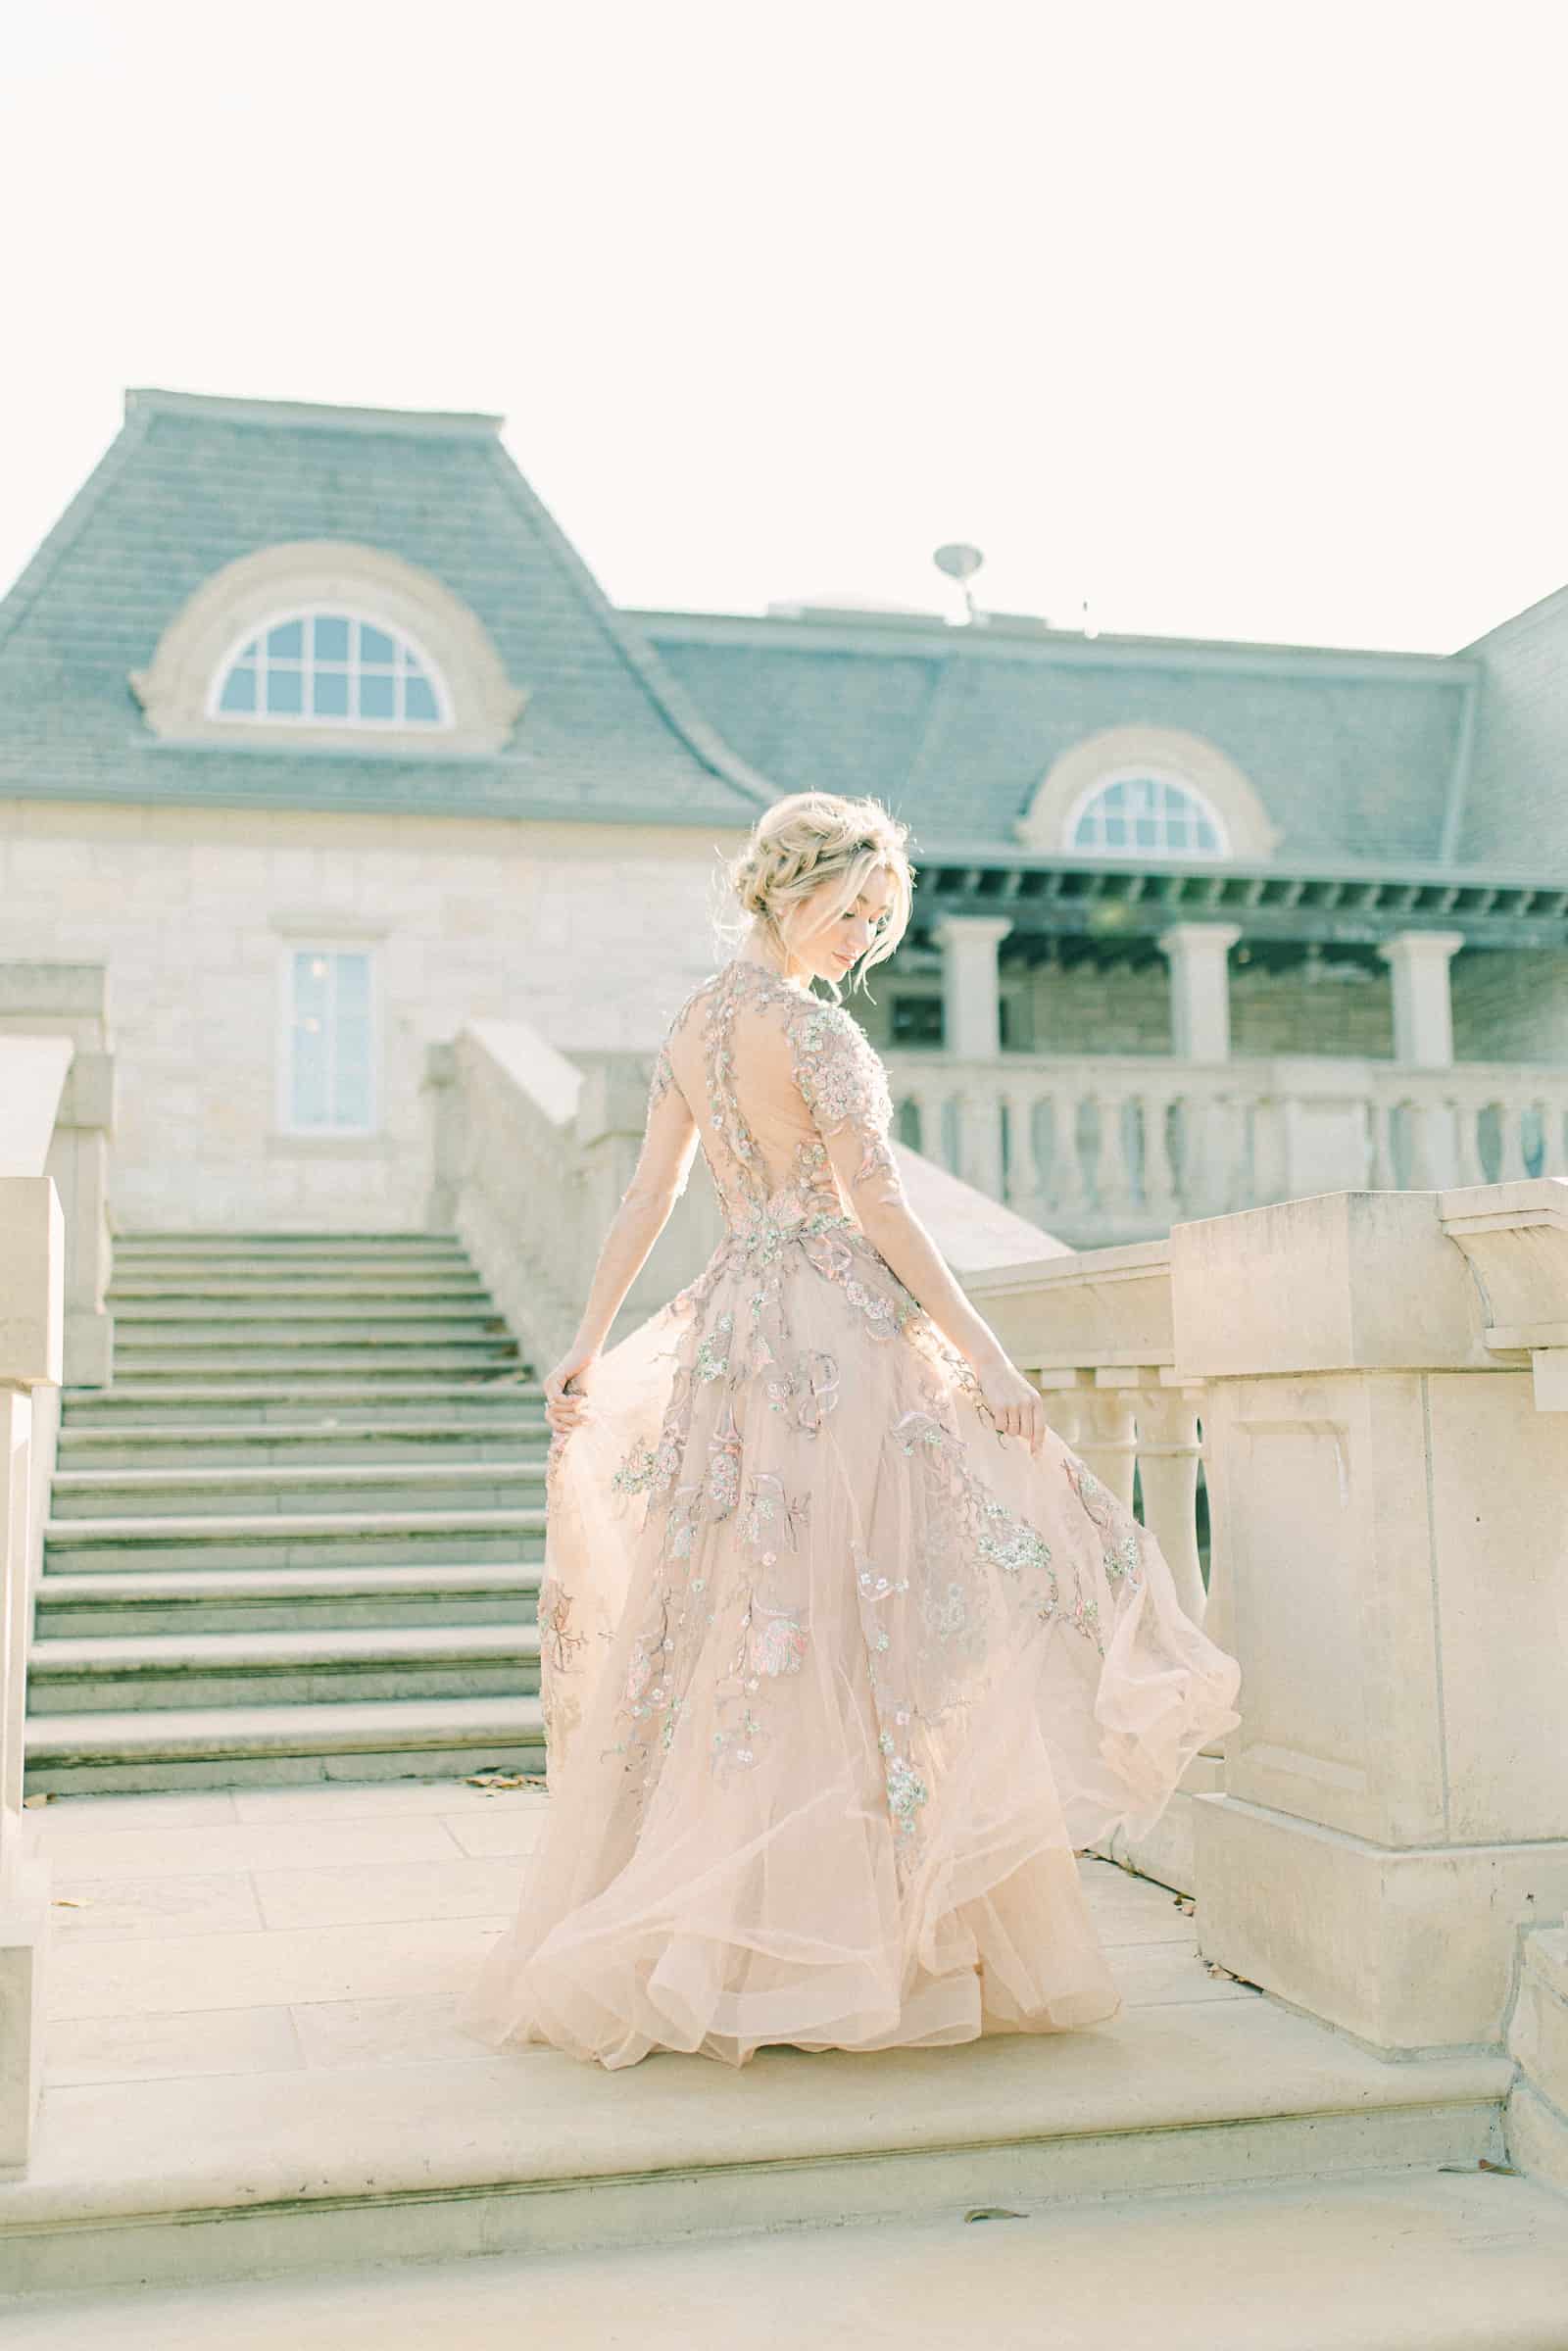 Bride walking down staircase wearing YSA Makino couture wedding dress with floral embellishments and embroidery, flowy wedding dress